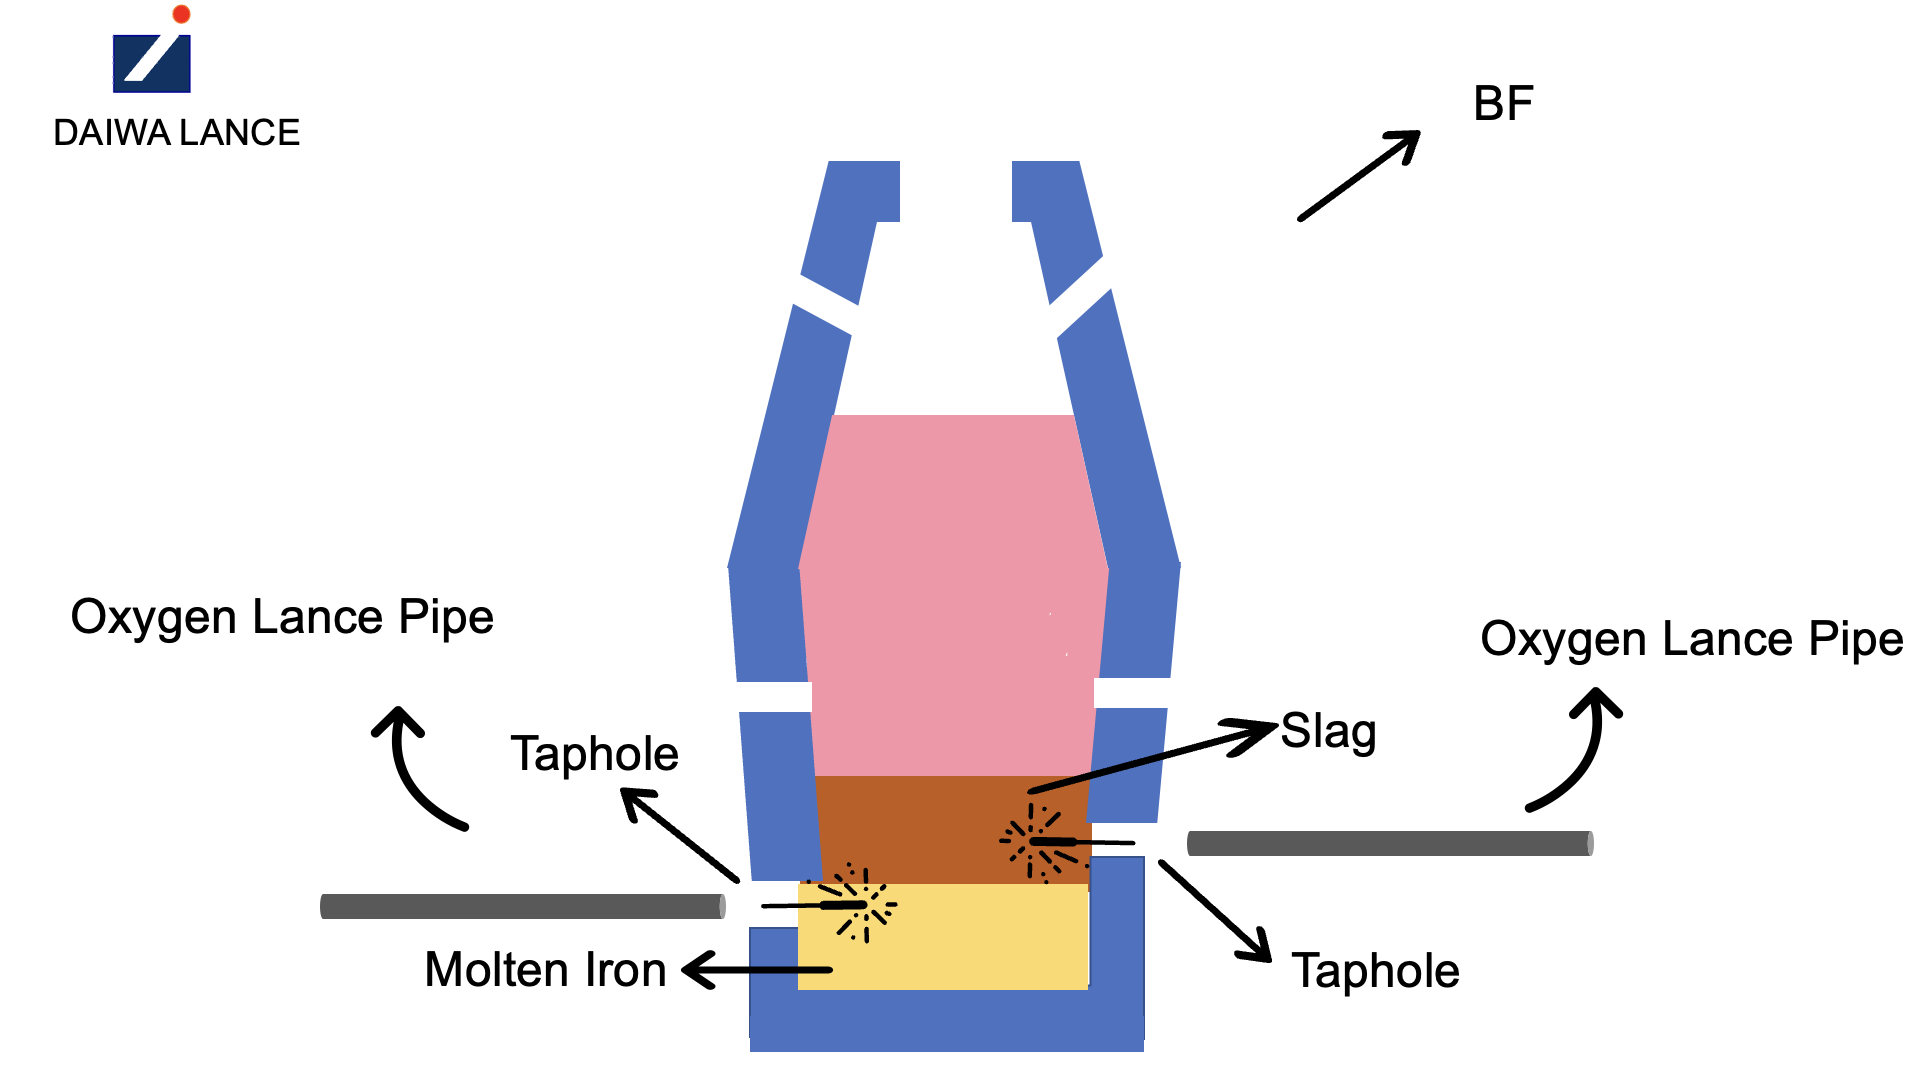 An illustration diagram of the taphole and oxygen lance pipe in Blast Furnace (BF)